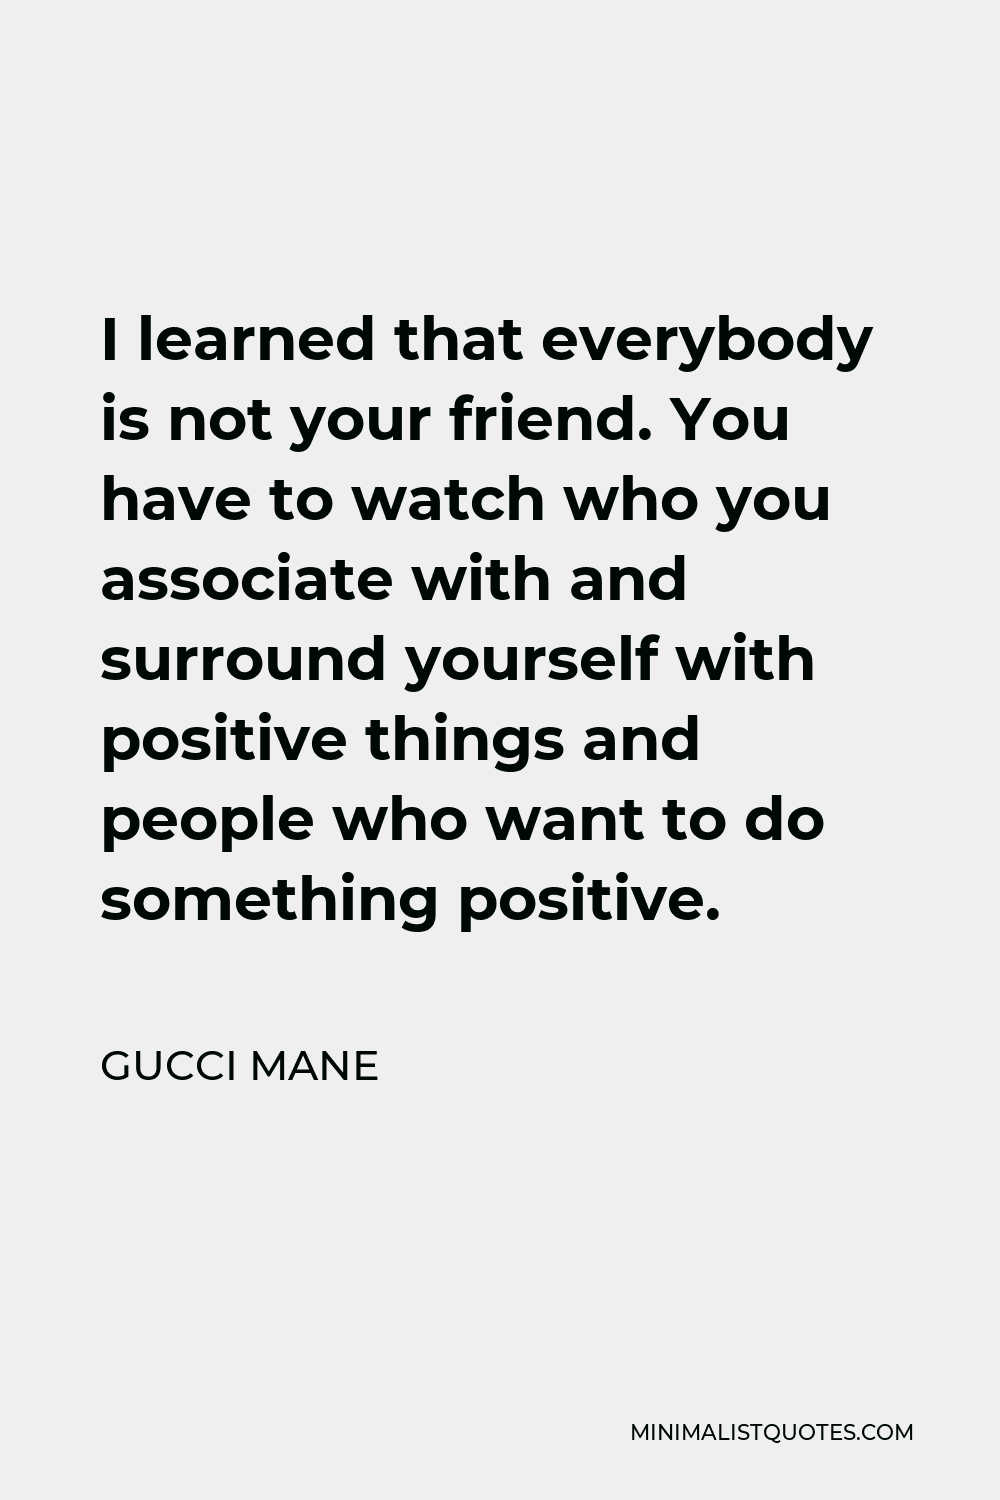 Gucci Mane Quote - I learned that everybody is not your friend. You have to watch who you associate with and surround yourself with positive things and people who want to do something positive.